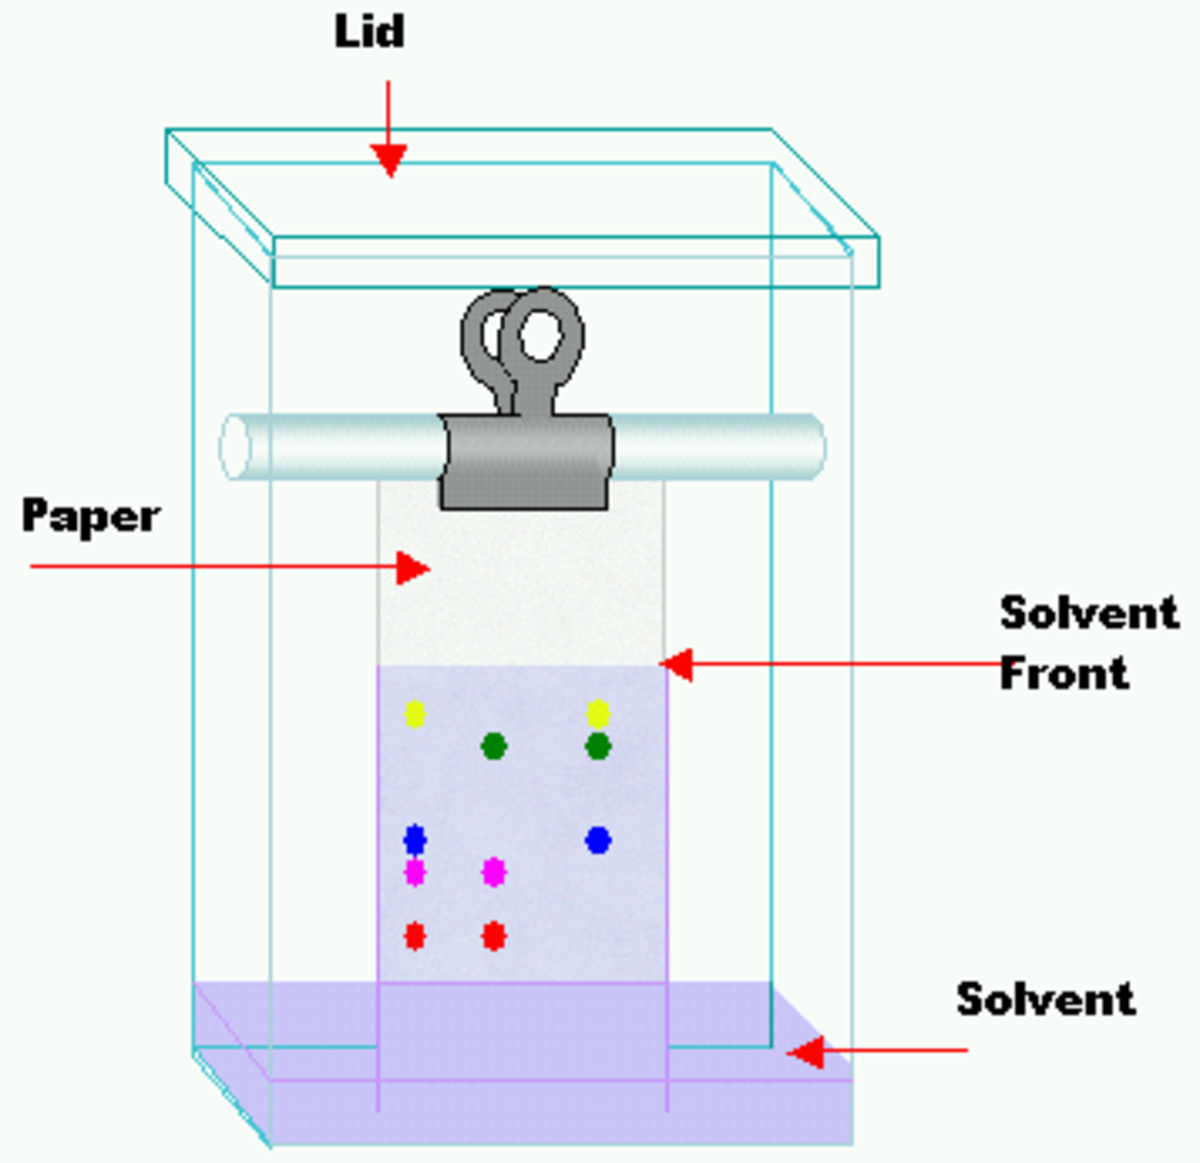 hypothesis of paper chromatography